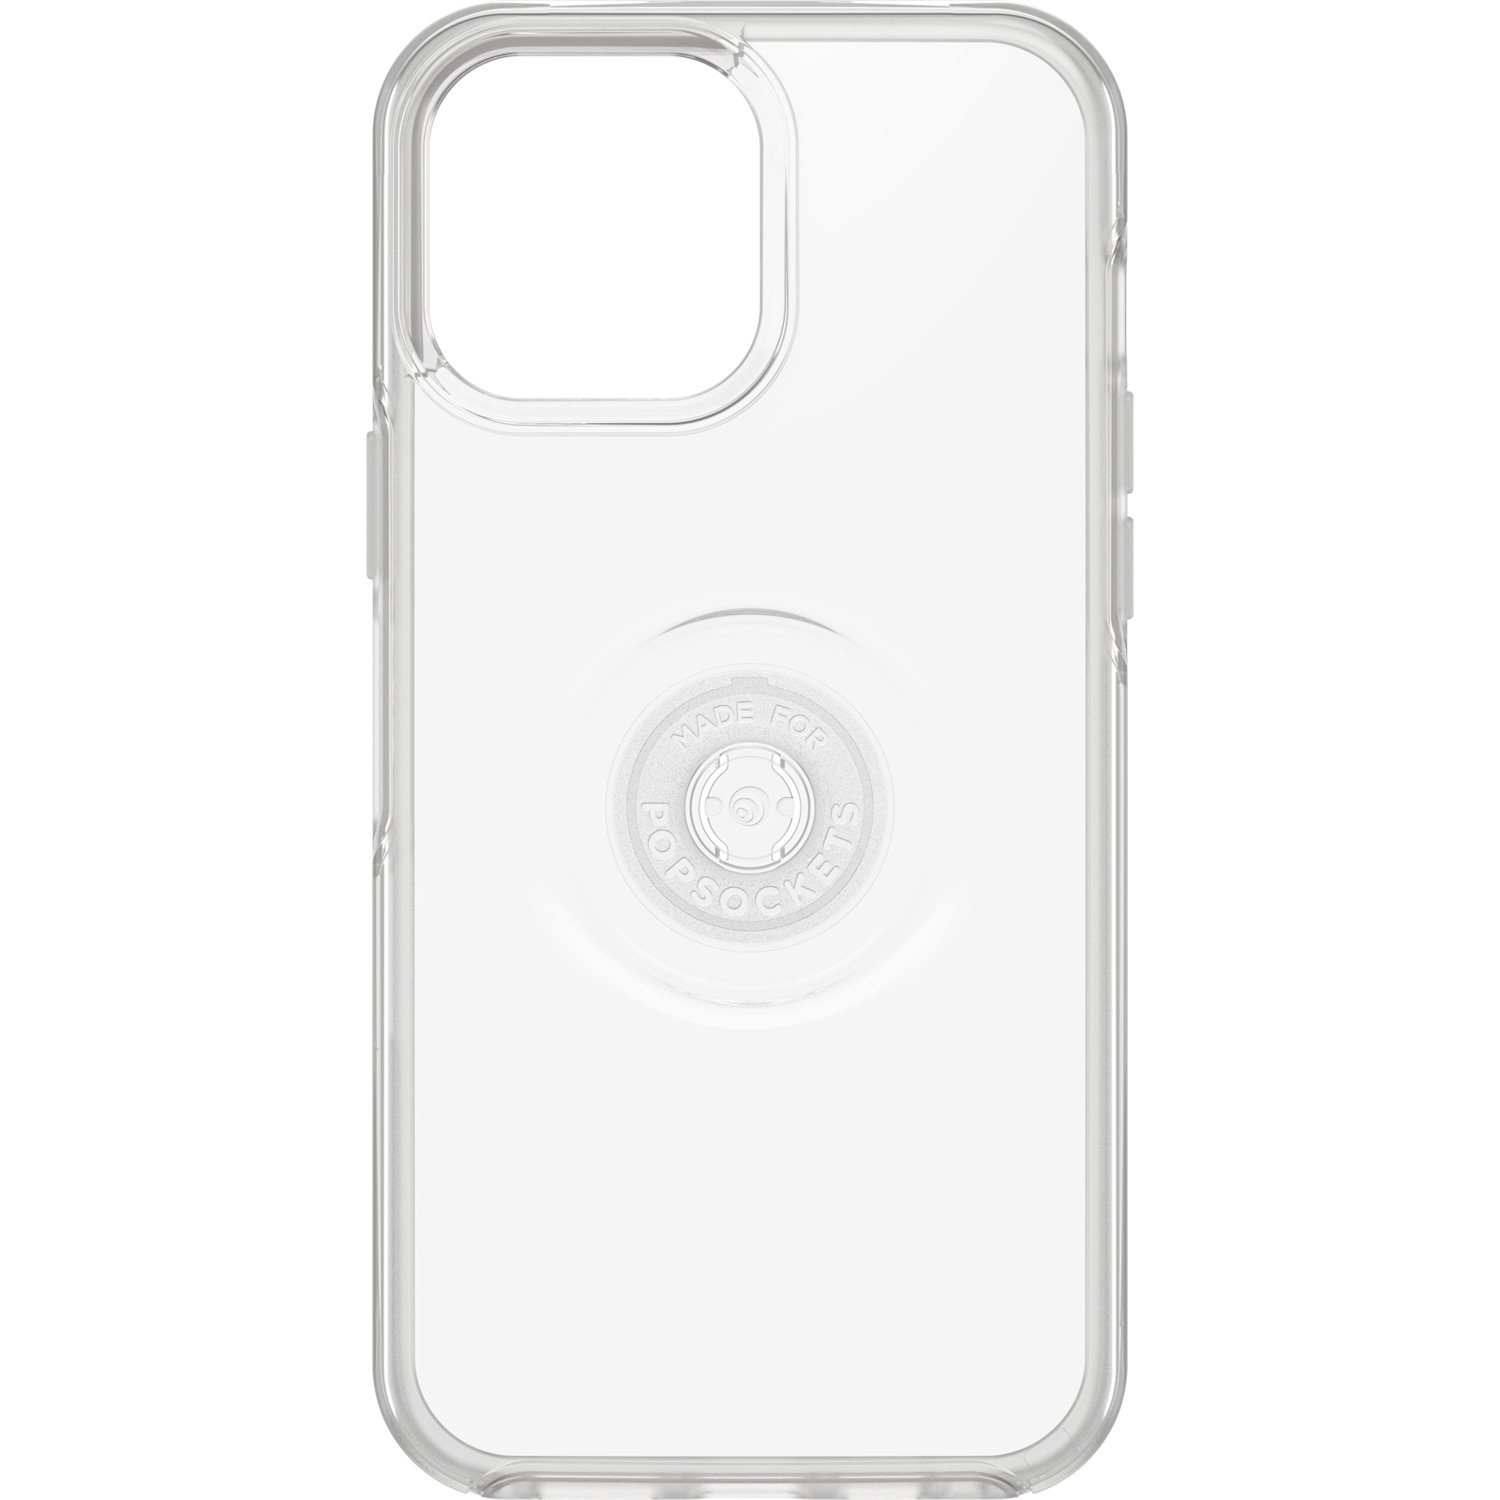 OtterBox iPhone 13 Pro Max Otter + Pop Symmetry Series Clear Case - Silver Flake/Clear/Off White/Clear W/Glitter - Raised Edges Protect Camera And SCR